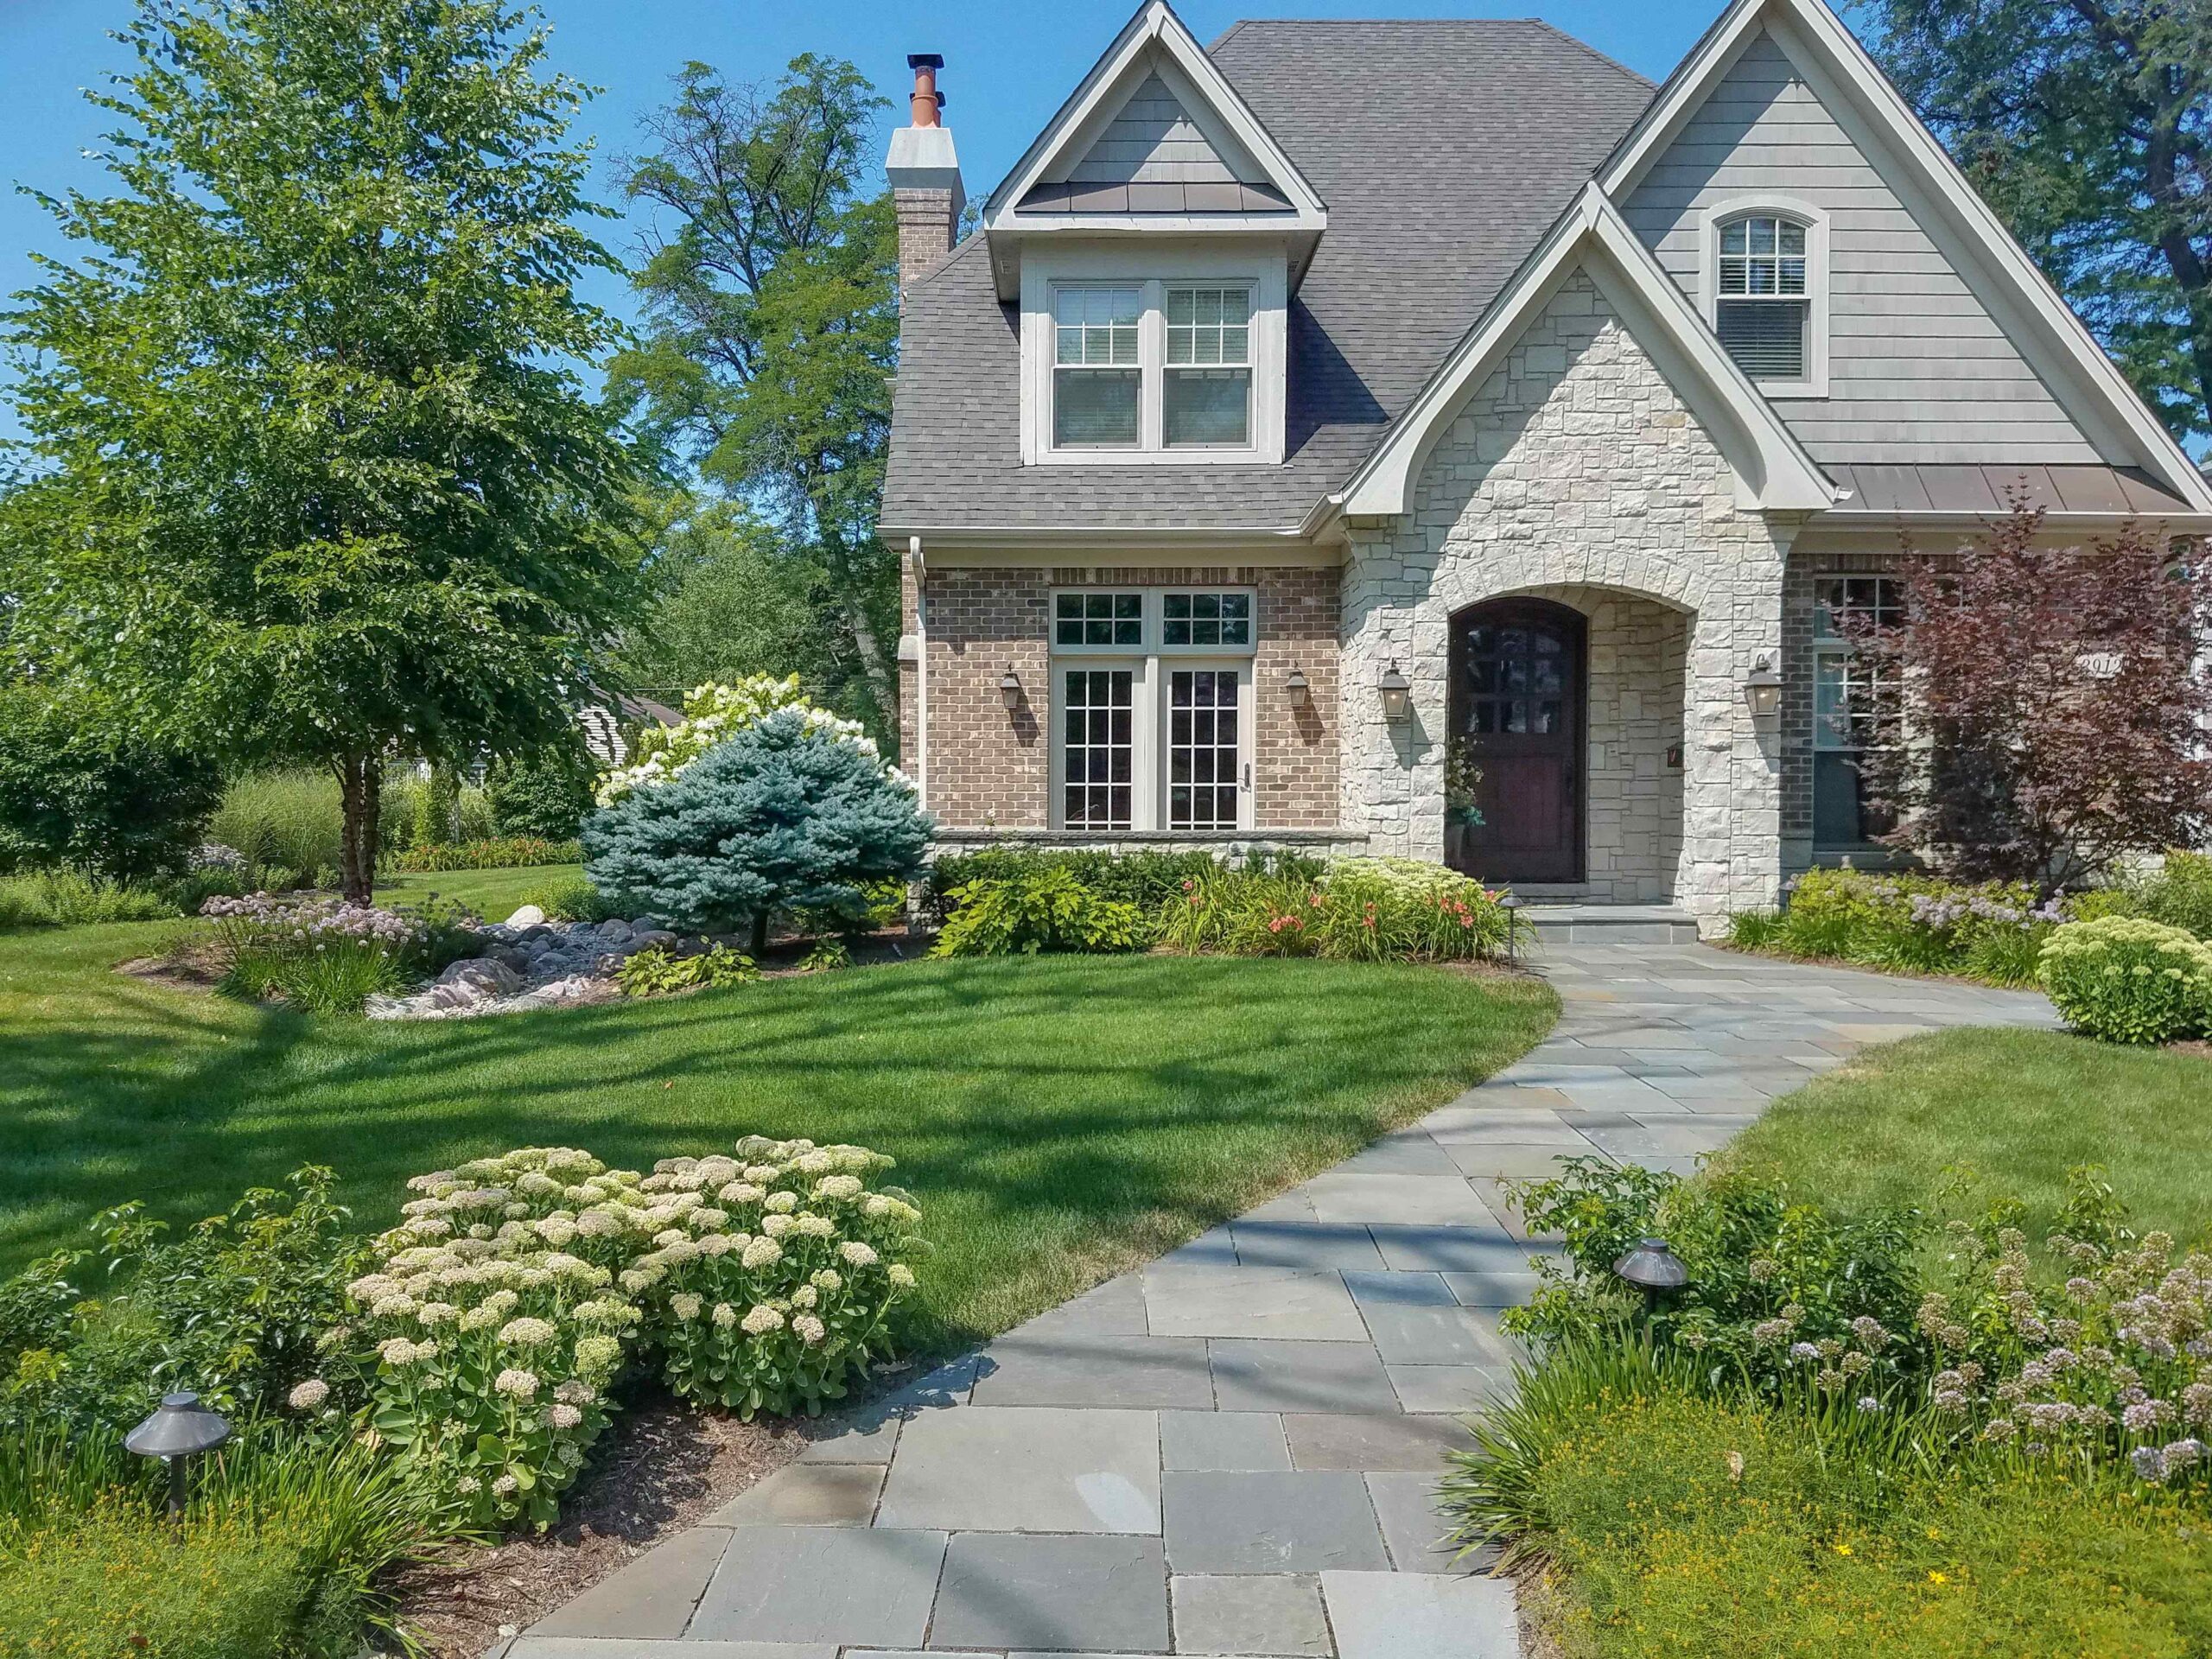 Hinsdale landscaping services